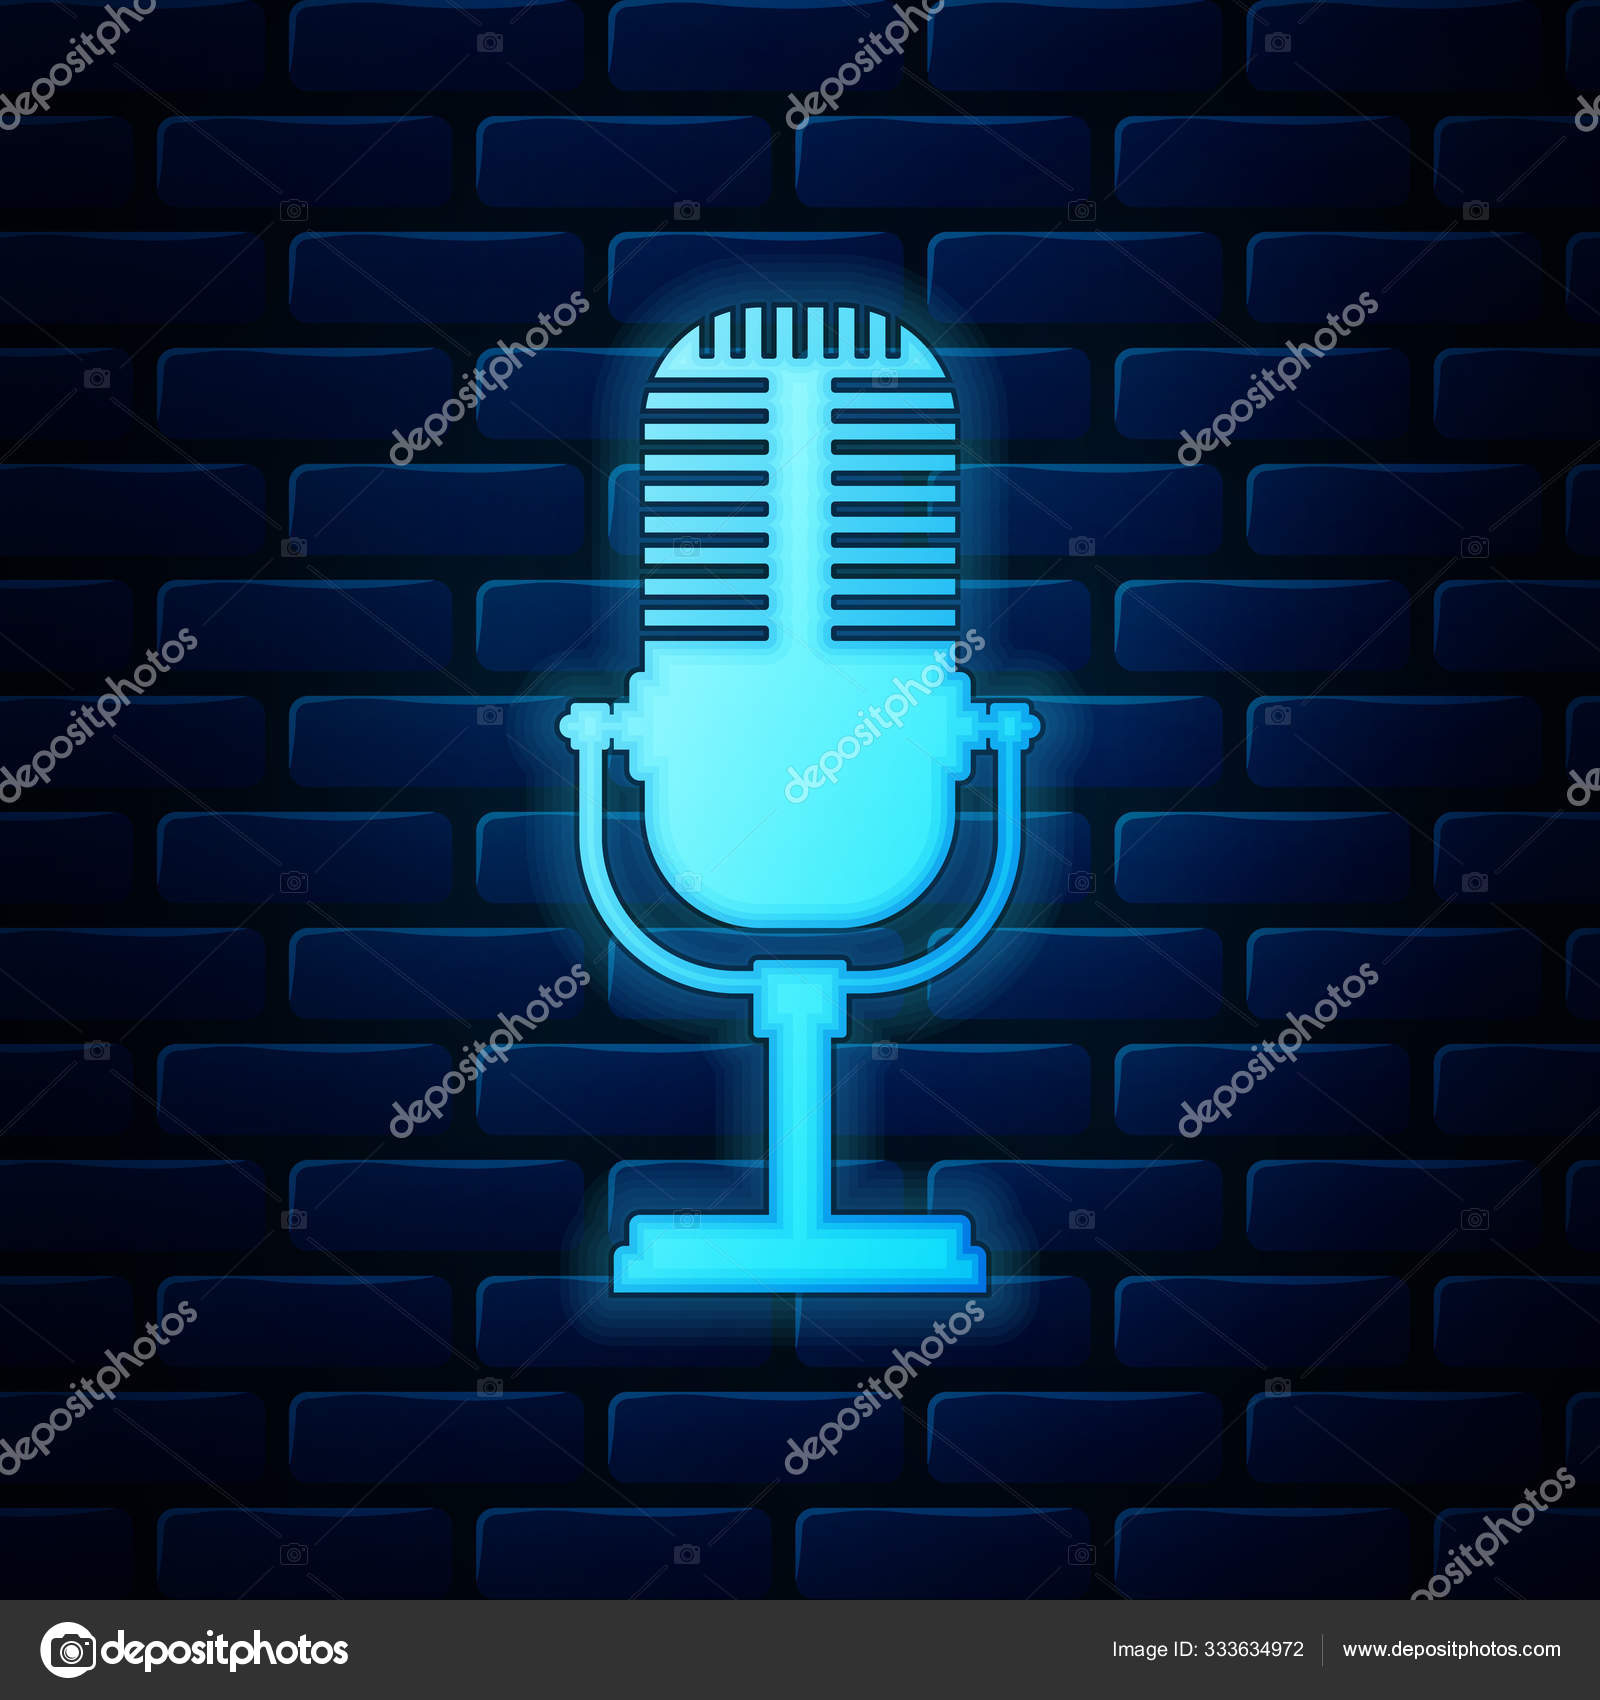 Live on air neon glowing sign brick wall Vector Image